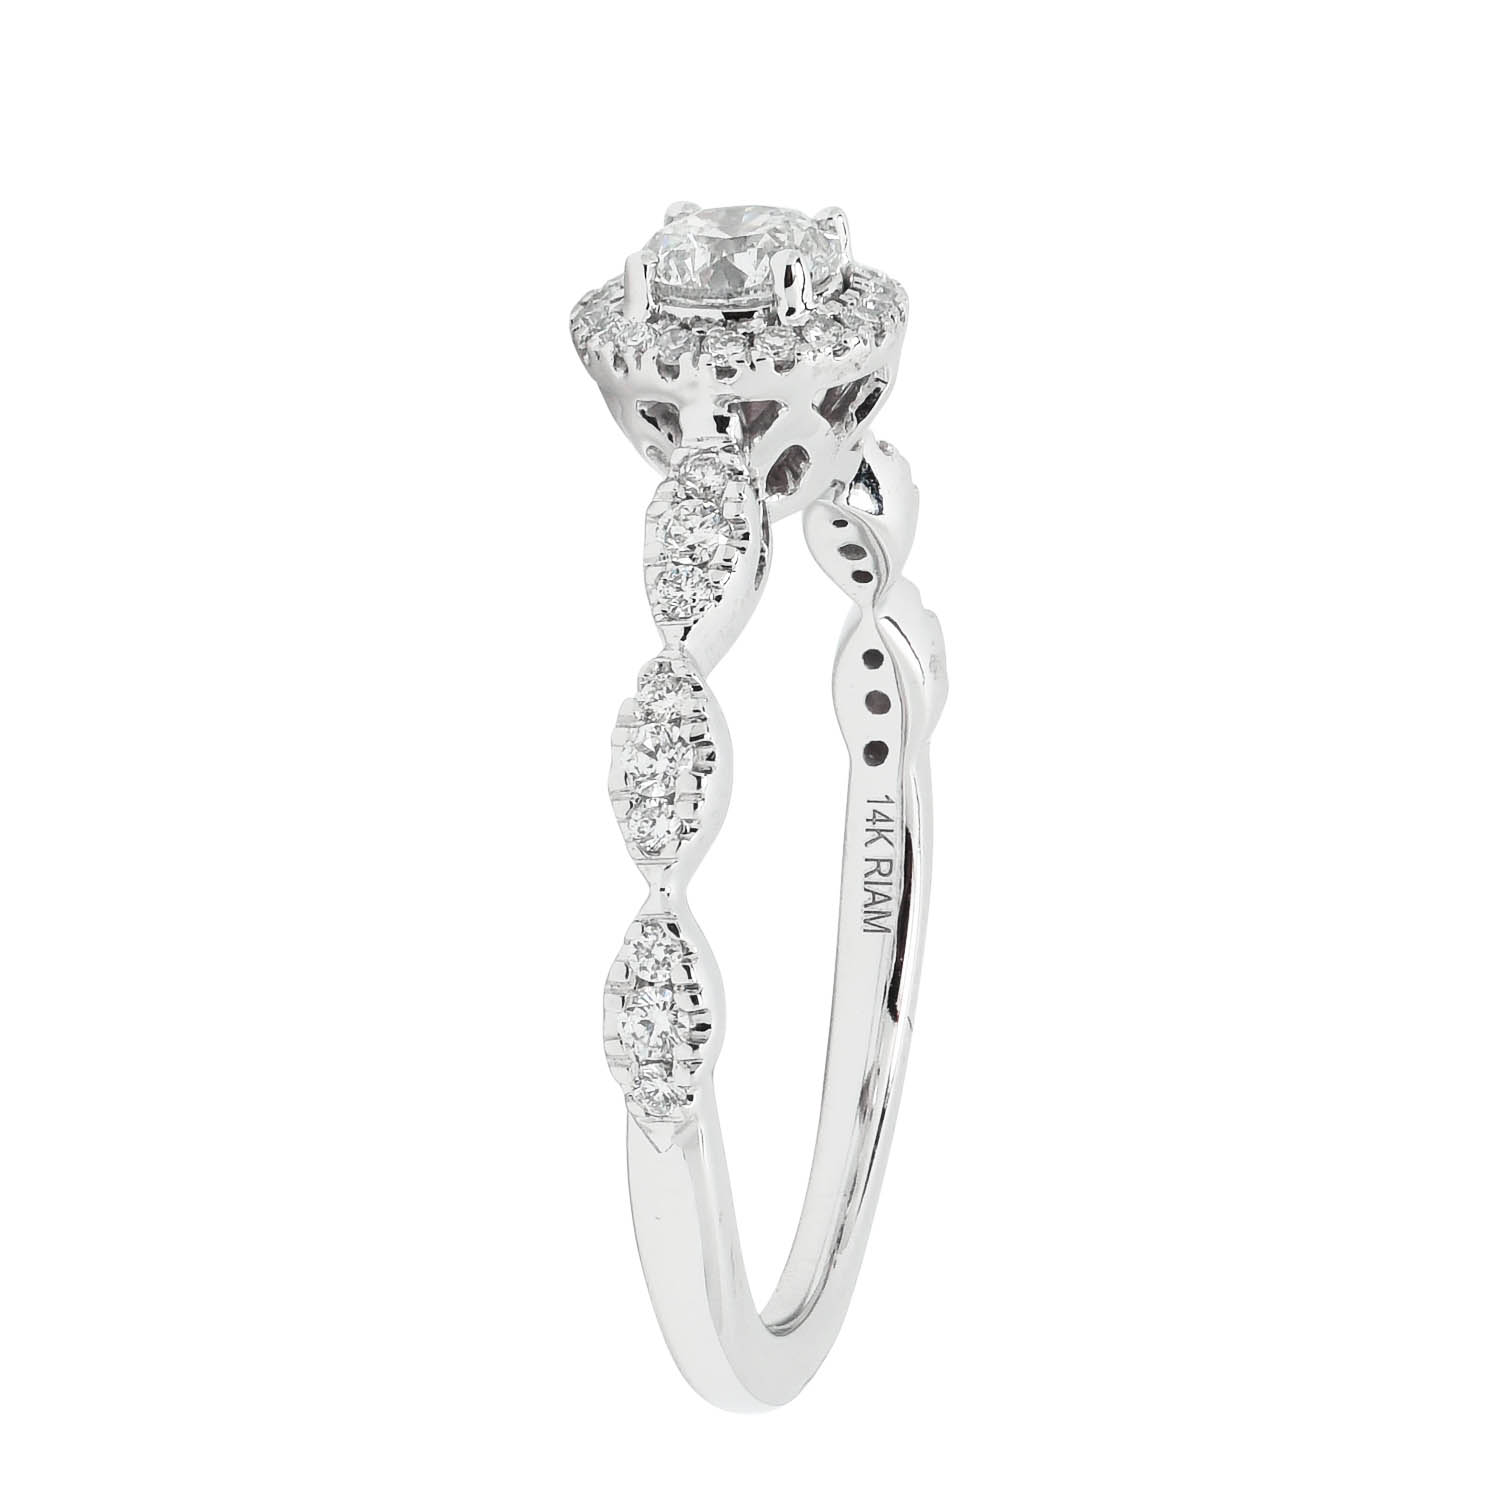 Northern Star Diamond Engagement Ring in 14kt White Gold (1/2ct tw)